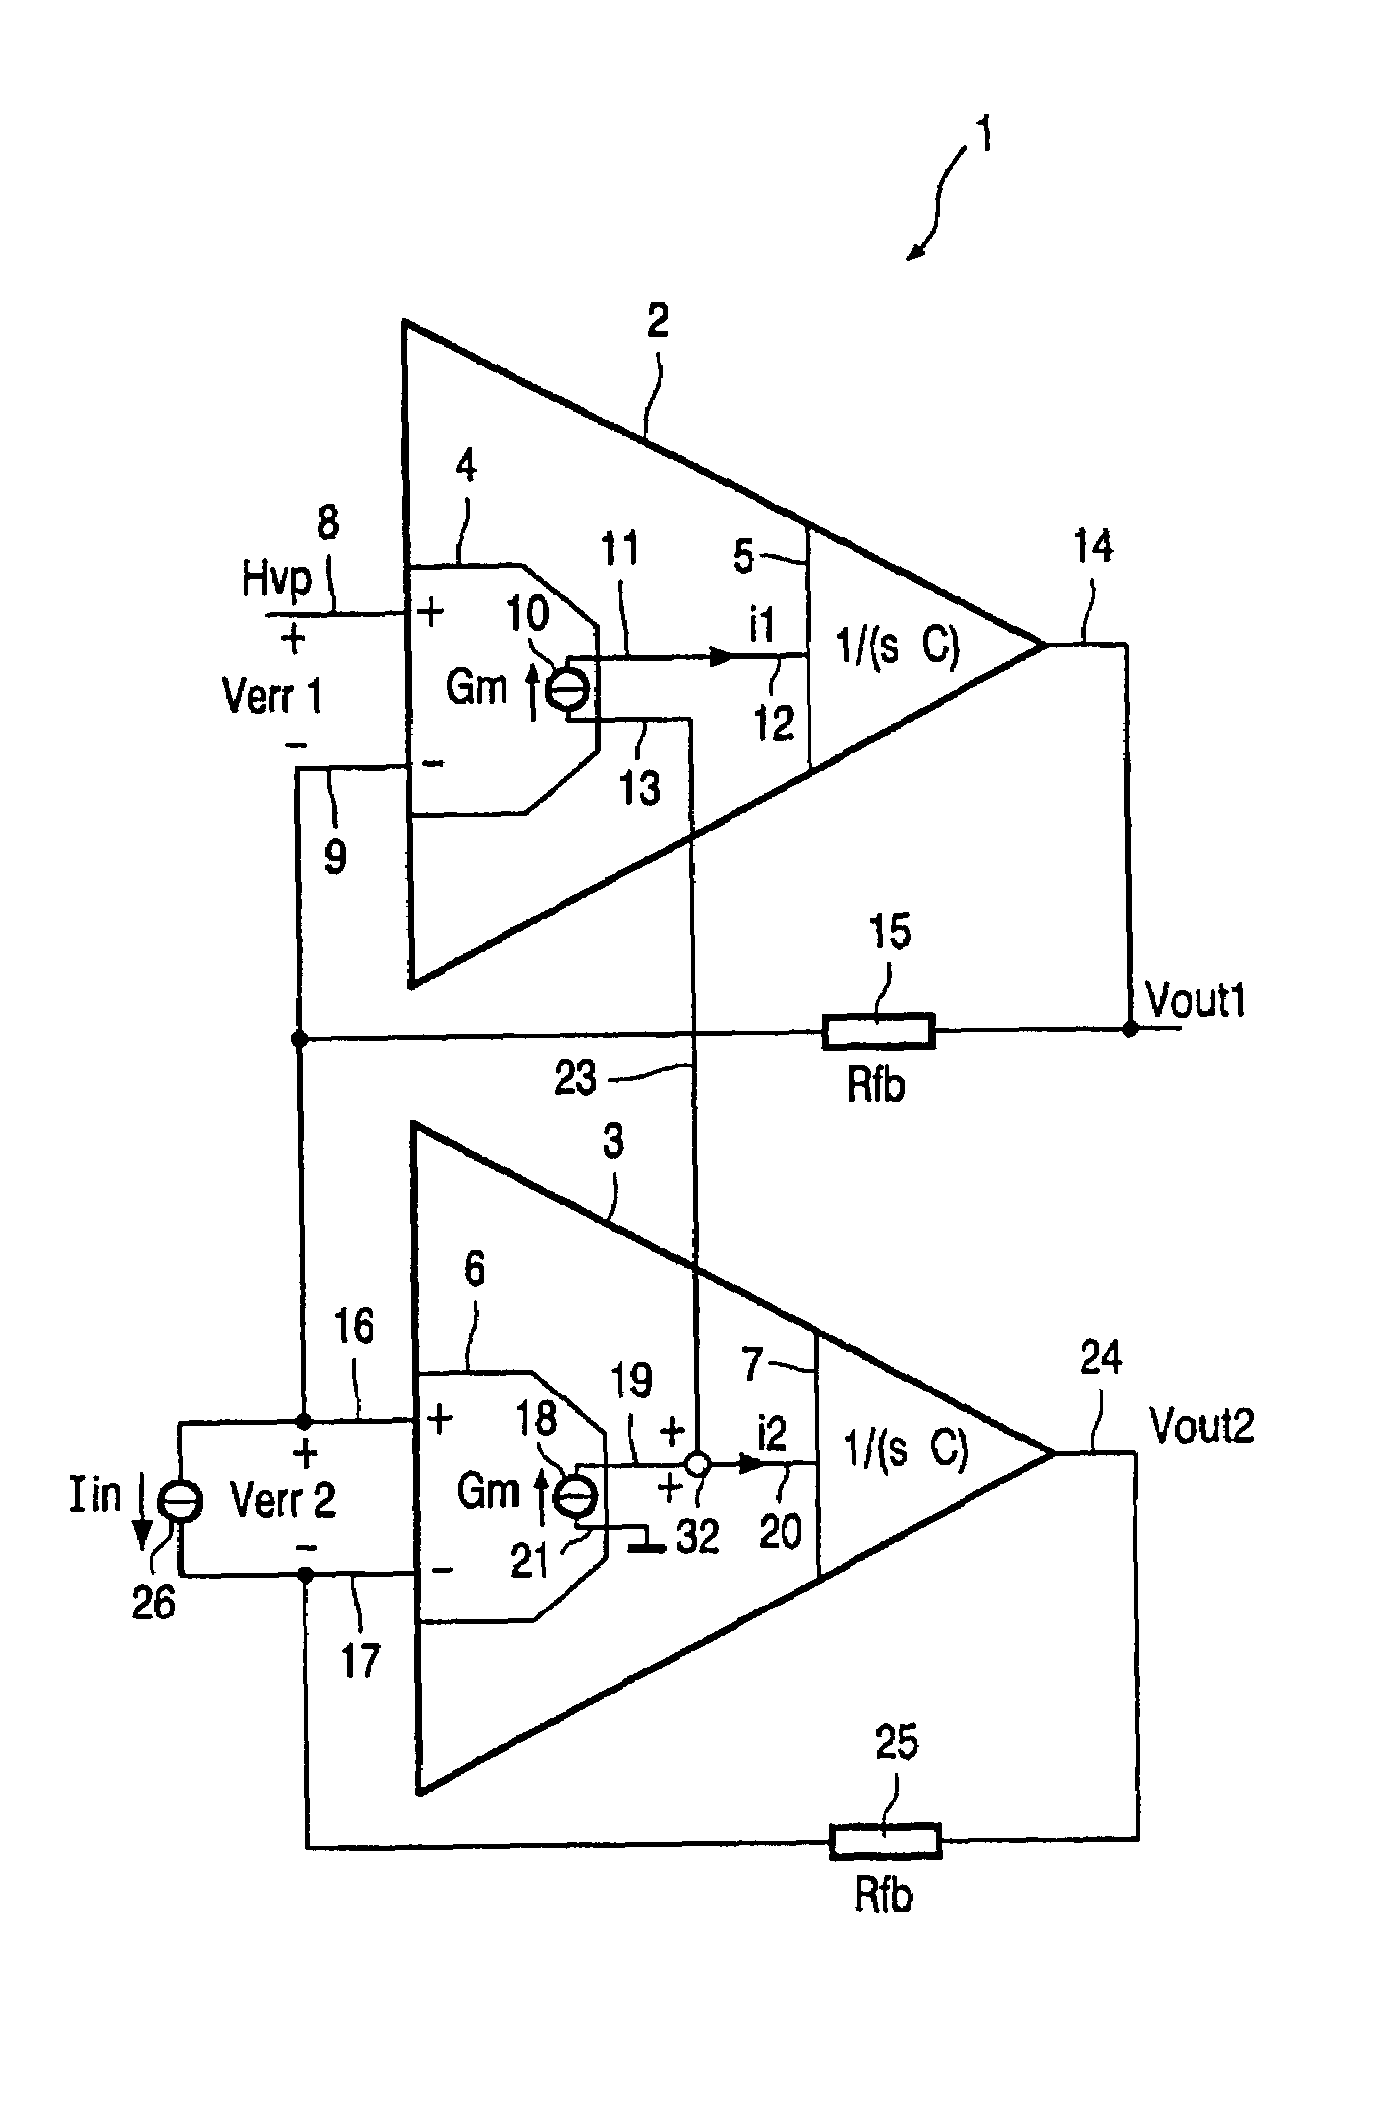 Power amplifier module with distortion compensation